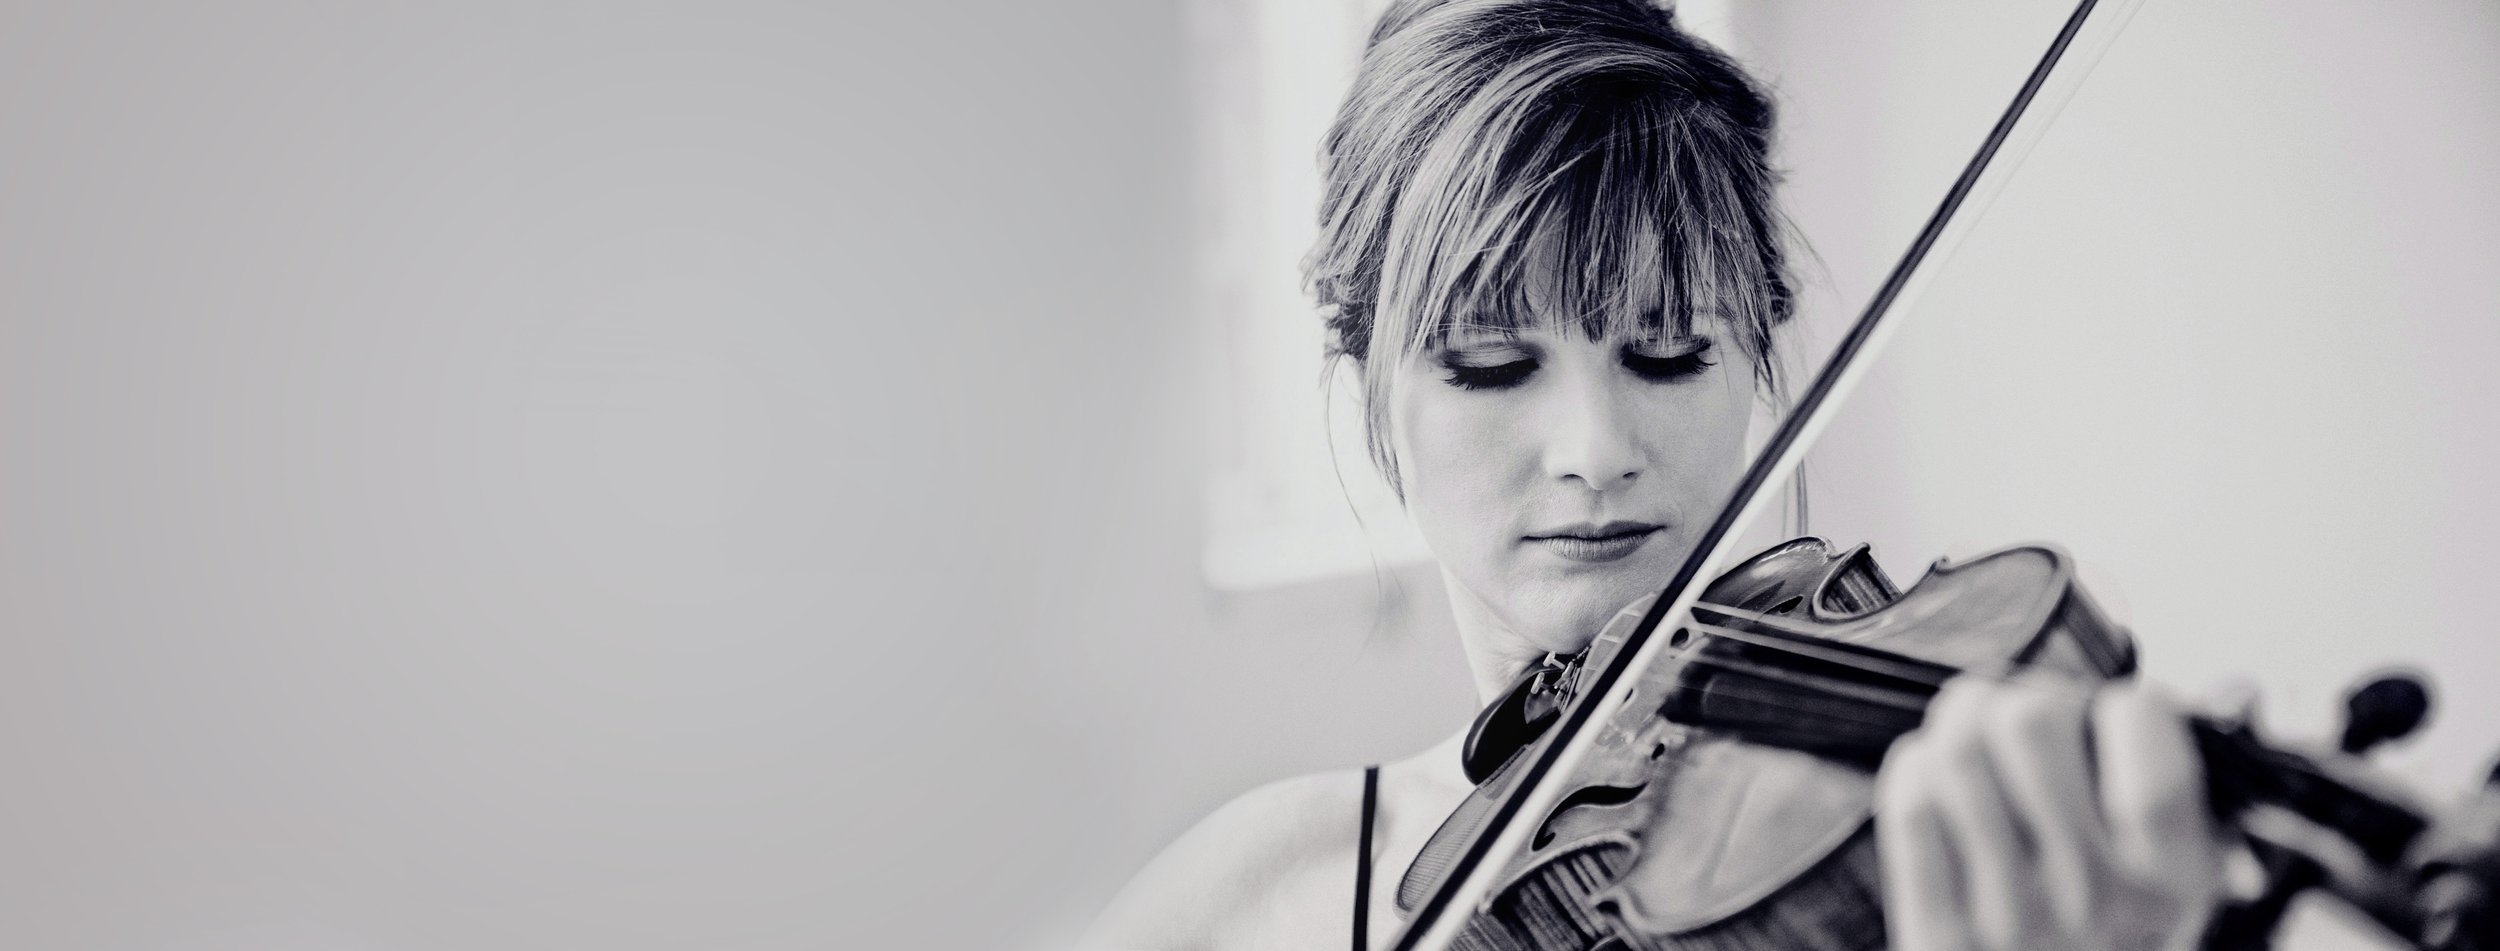 A woman playing a contemporary violin